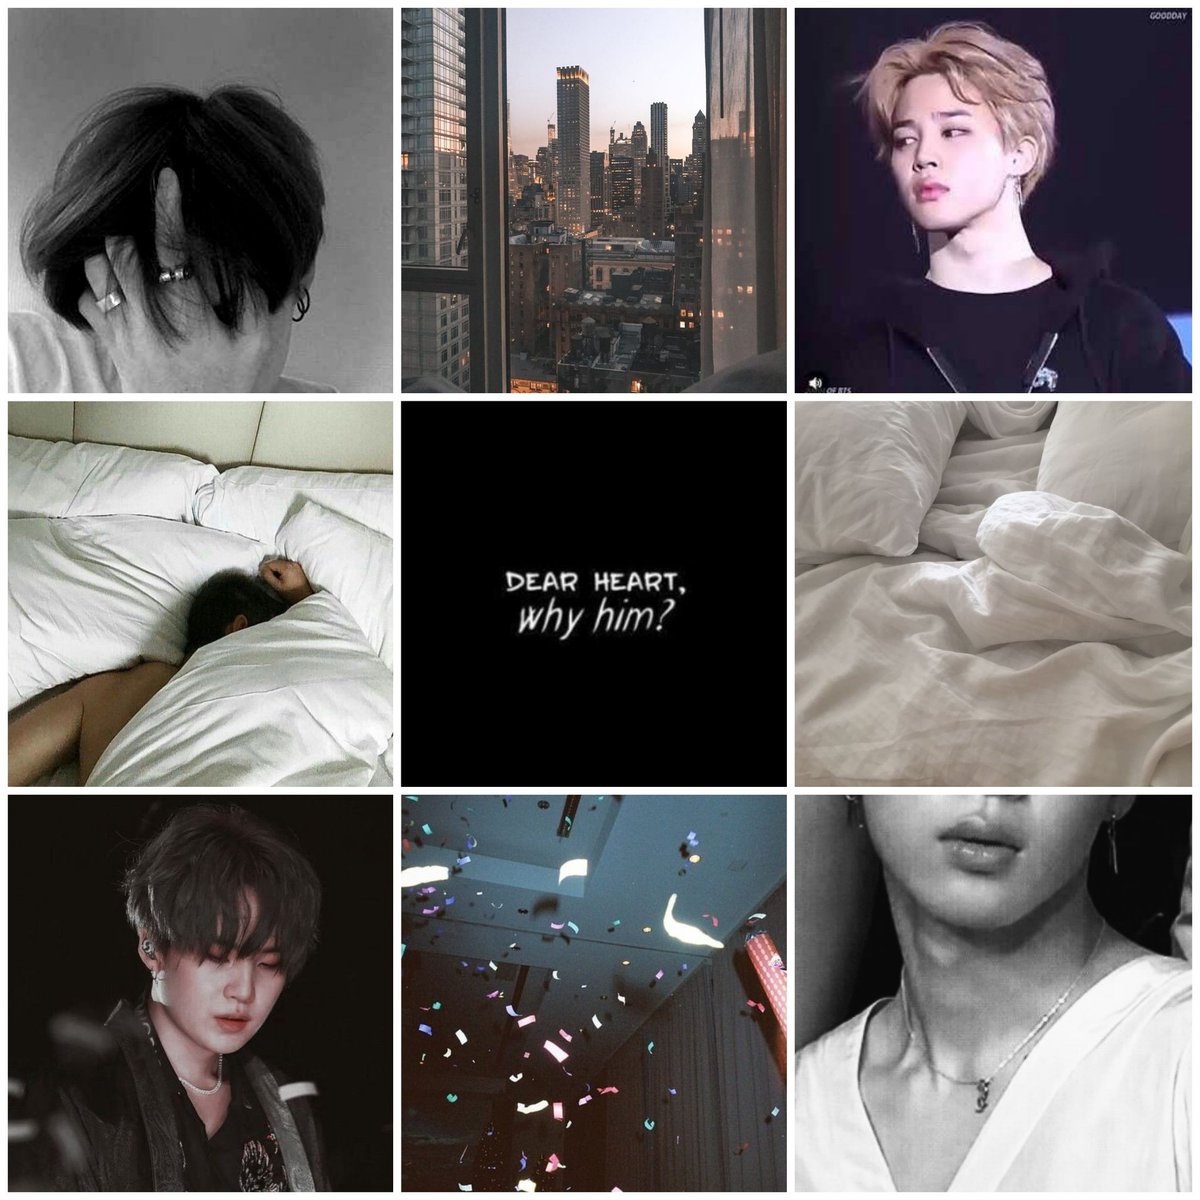  Yoonmin One night stands are meant to be just that. But after one dreamy night with the hottest, most popular boy in school, Yoongi's heart betrays him. He thinks he's found the one until Jimin leaves him broken and humiliated."I'd rather be dead than be seen with you."